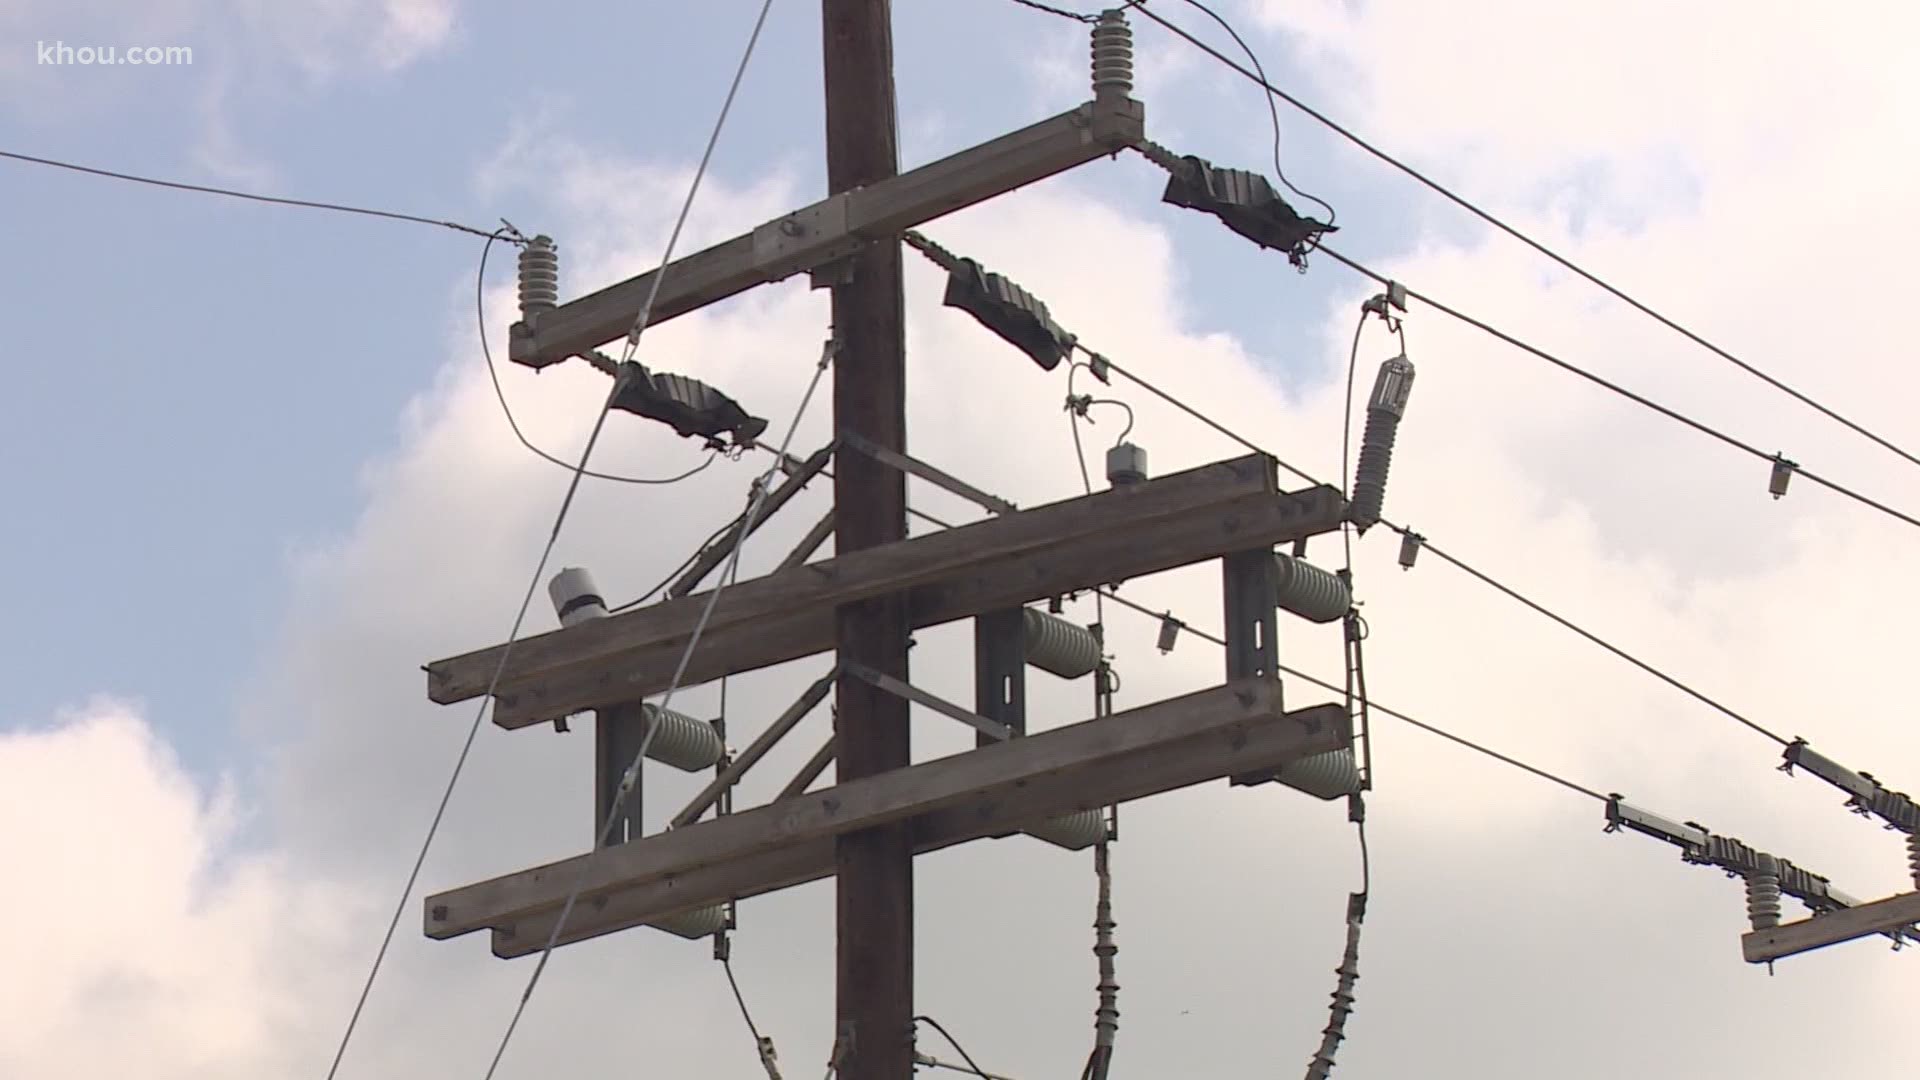 If you're an Entergy customer in the Houston area, your power should be restored after the company said it fixed its transmission line that damaged during Laura.